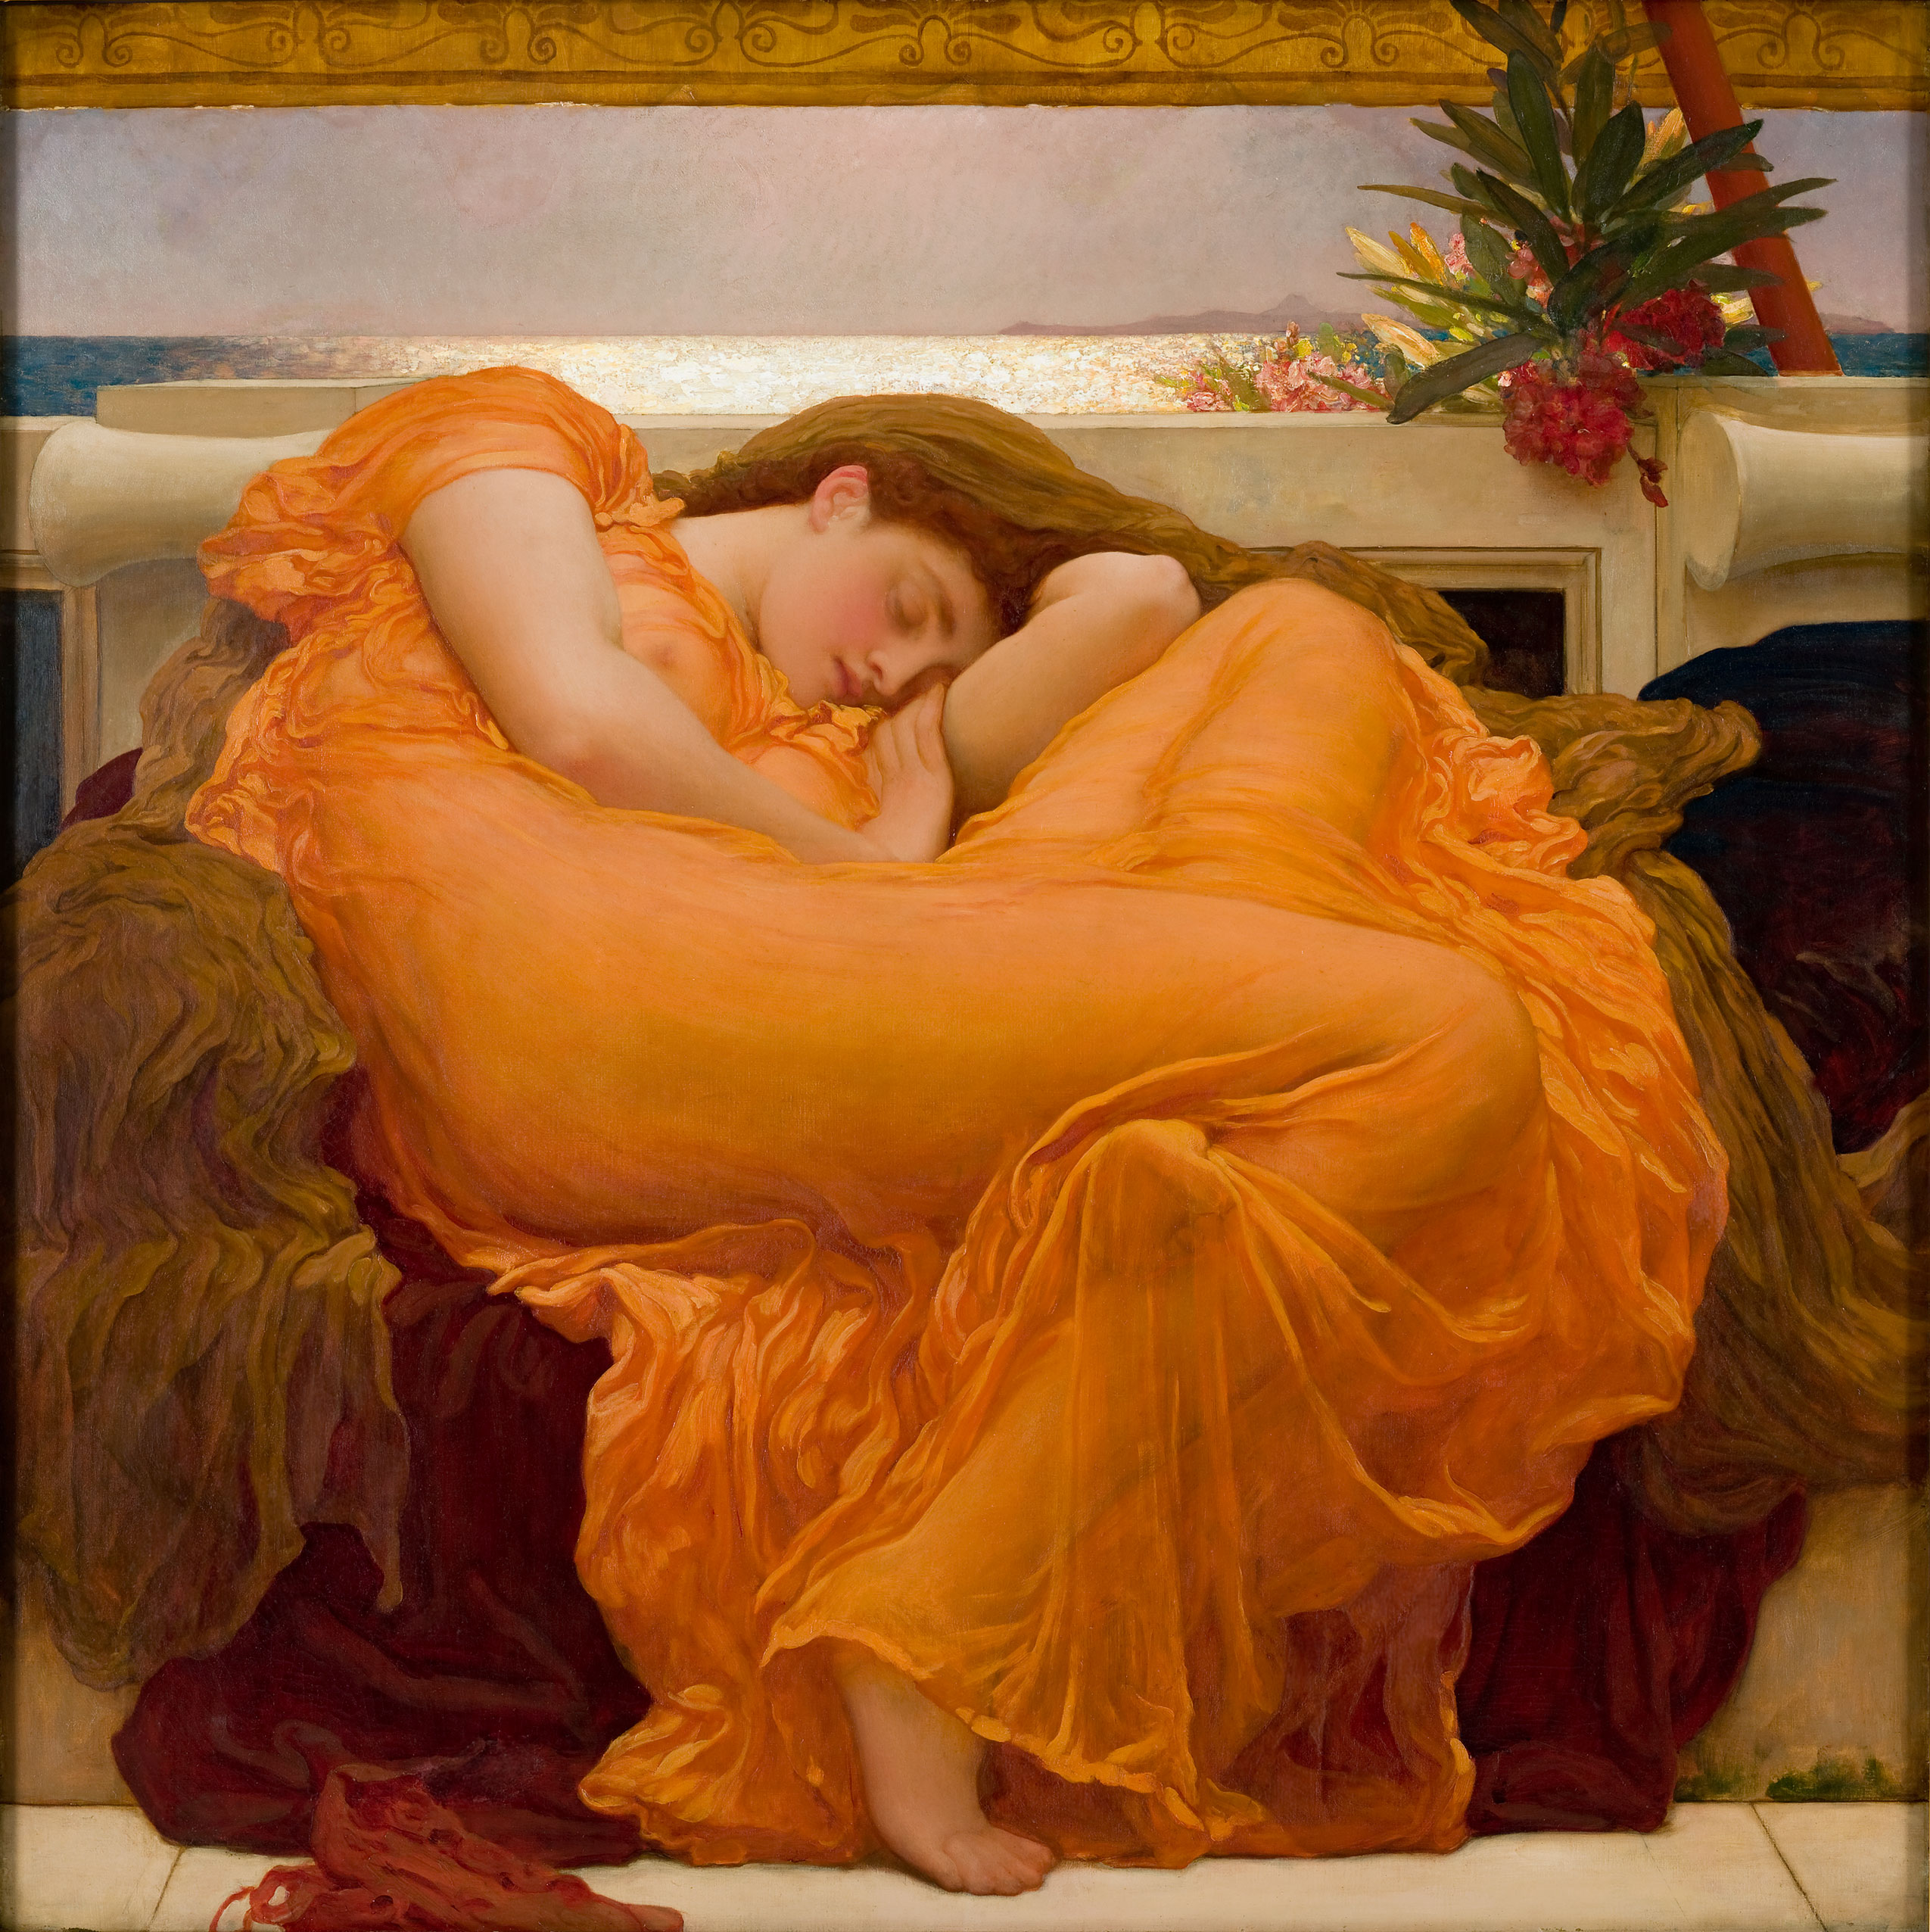 https://www.willowolder.com/wp-content/uploads/2016/10/Flaming_June_by_Frederic_Lord_Leighton_1830-1896.jpg